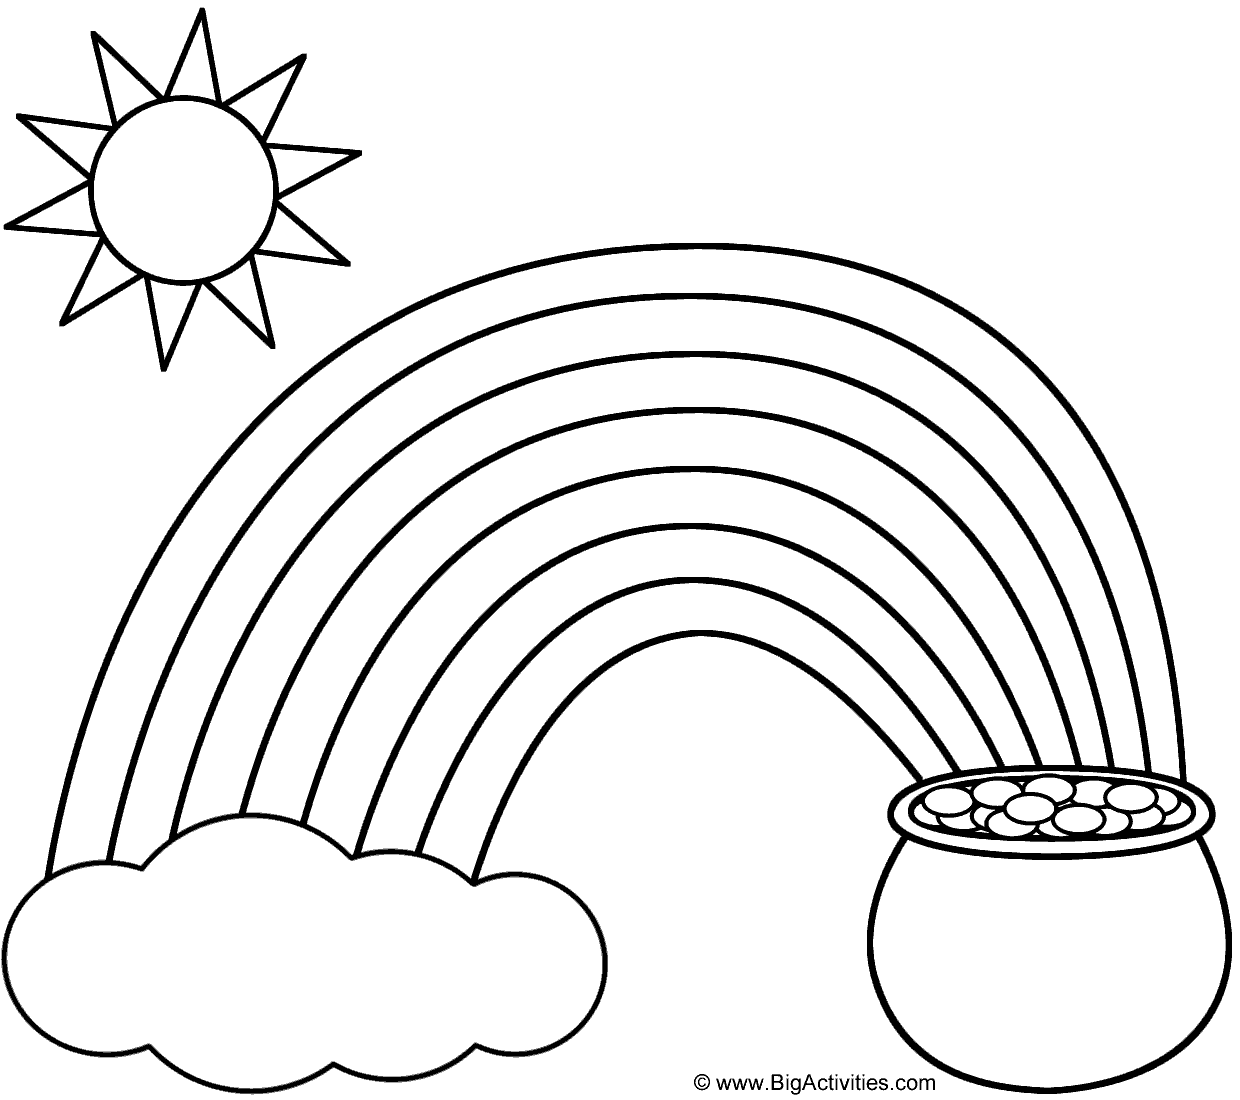 Rainbow, Pot of Gold, Sun, and Cloud - Coloring Page (St. Patrick's Day)